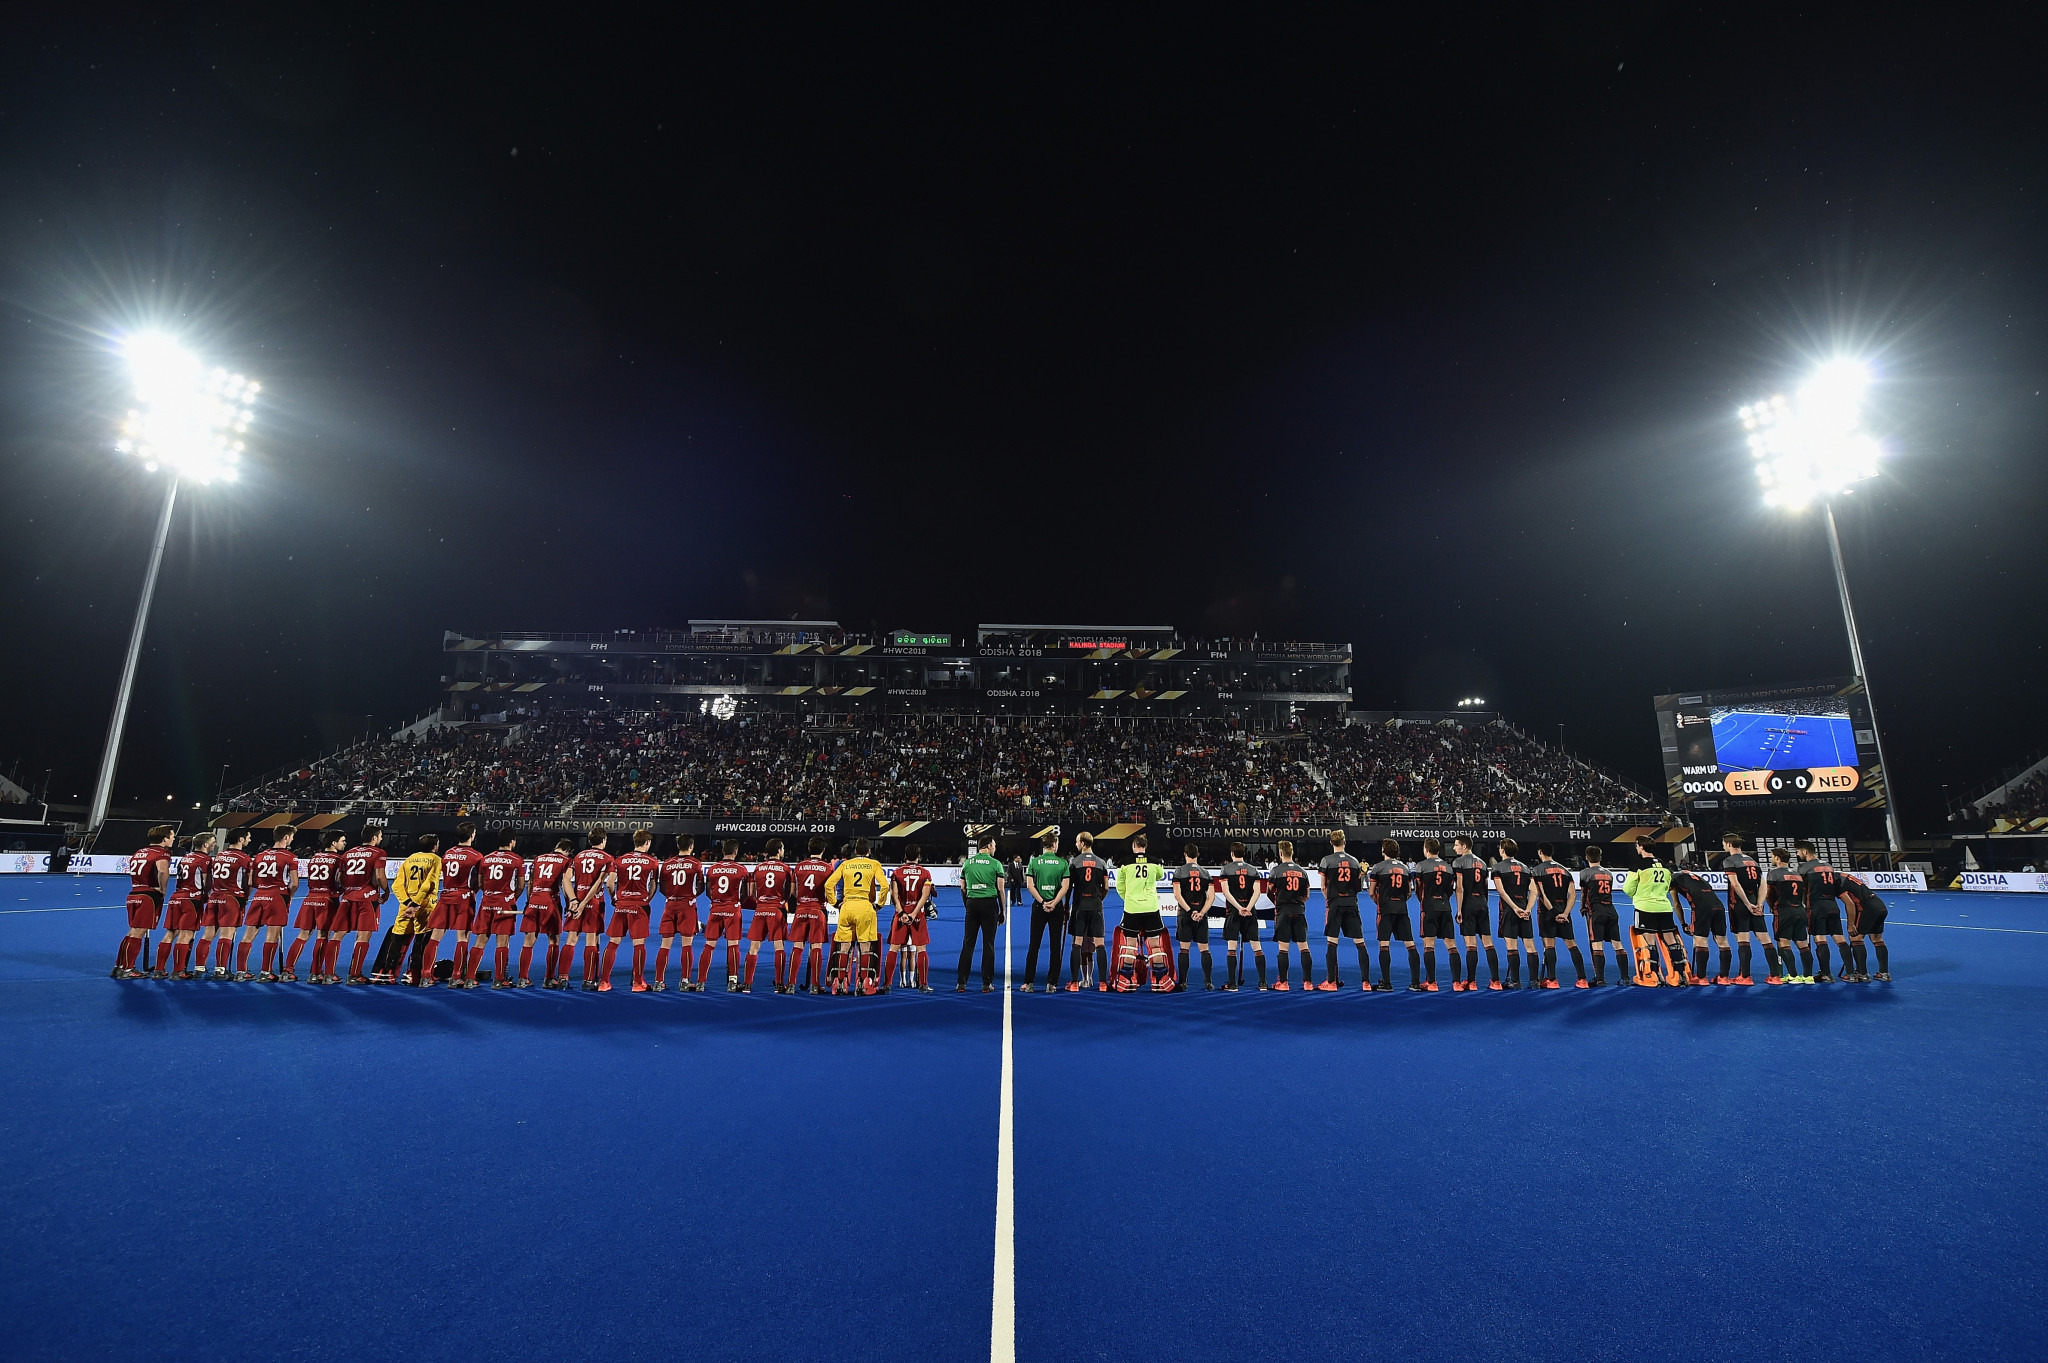 The FIH Series Finals event in Bhubaneswar will be held at Kalinga Stadium, where the 2018 FIH Men's Hockey World Cup was held ©Getty Images